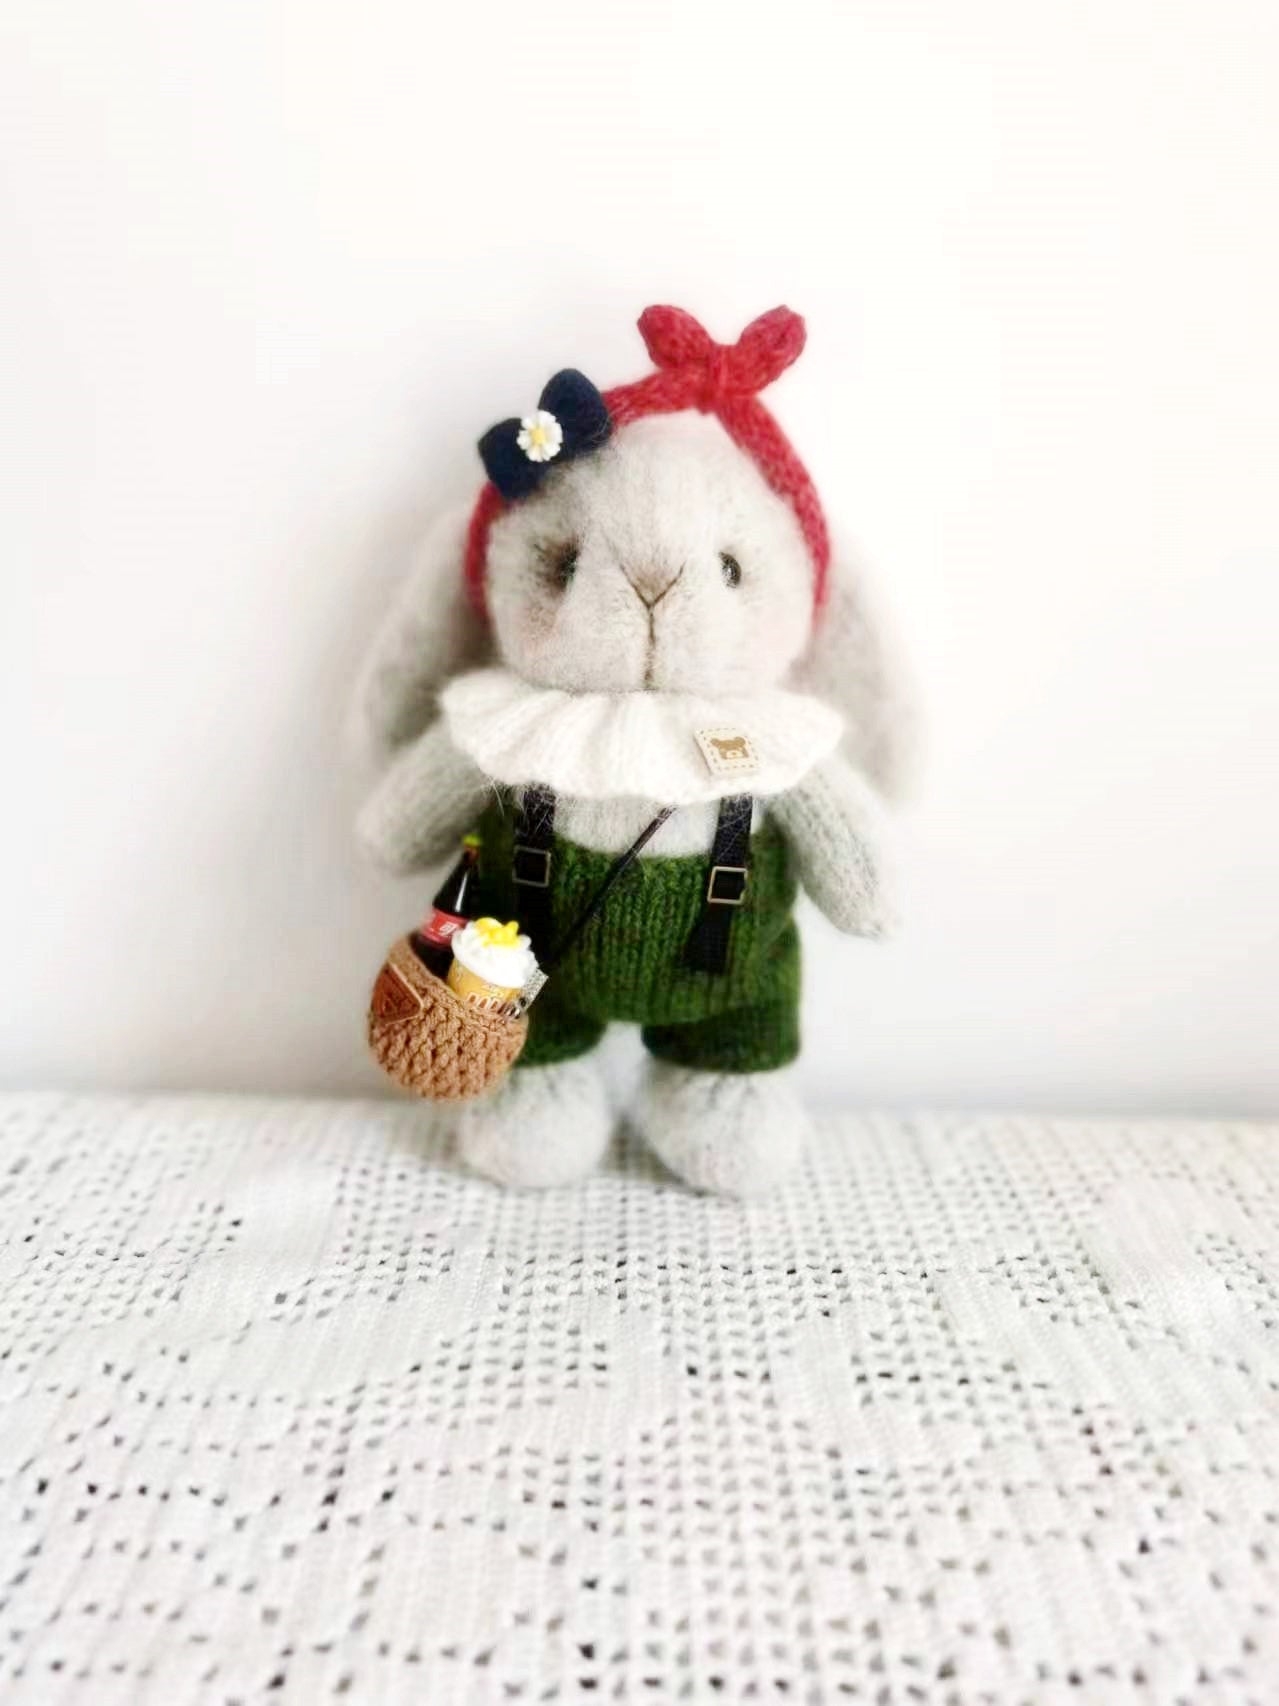 Adorable Knitted Bunny Ornament for Home Decoration Ideas